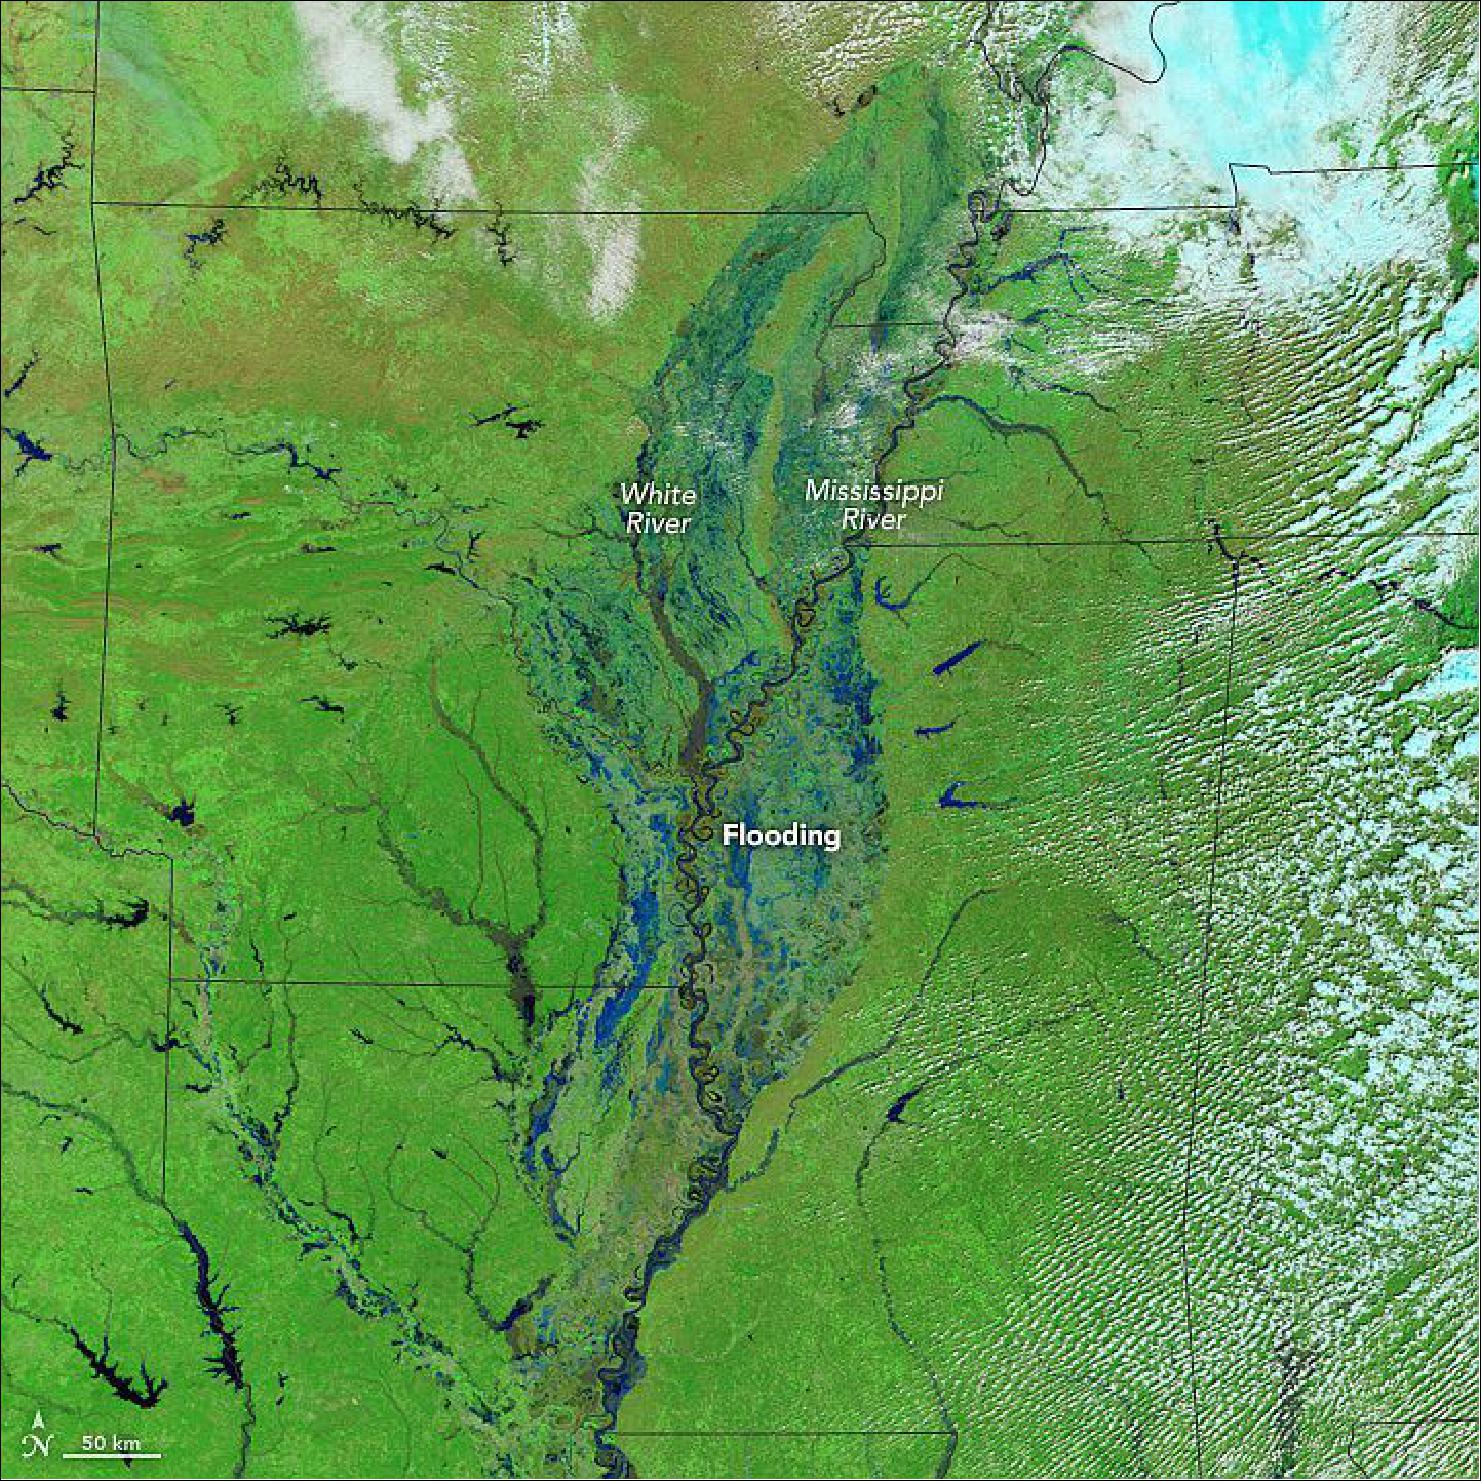 Figure 90: Extend of flooding observed by the MODIS instrument on Terra [image credit: NASA Earth Observatory, using data from LANCE (Land Atmosphere Near real-time Capability for EOS), Jesse Allen]